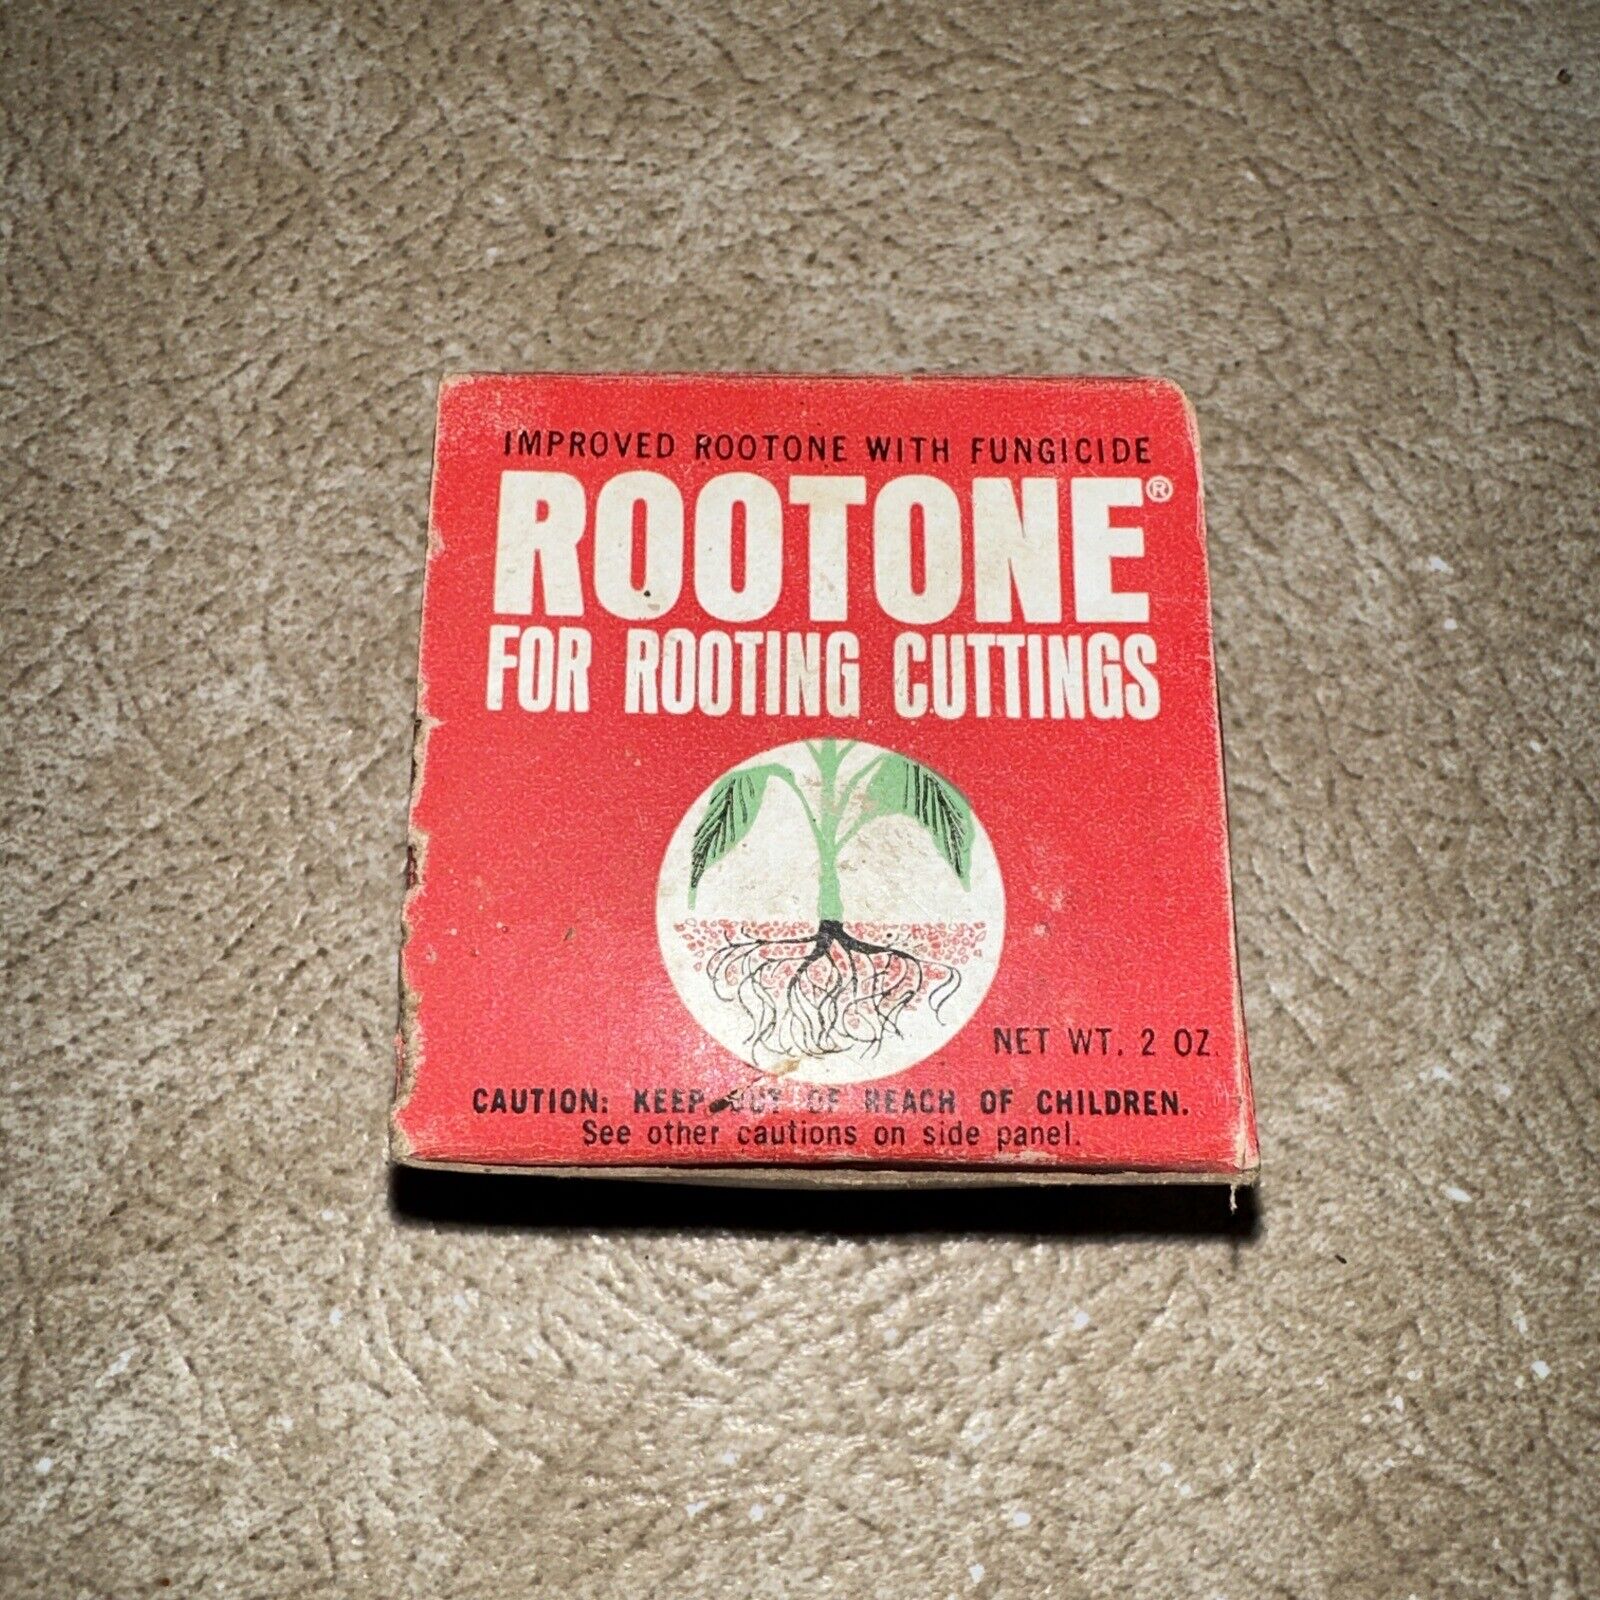 Vintage Rootone Box and Instructions by AMCHEM American Chemical